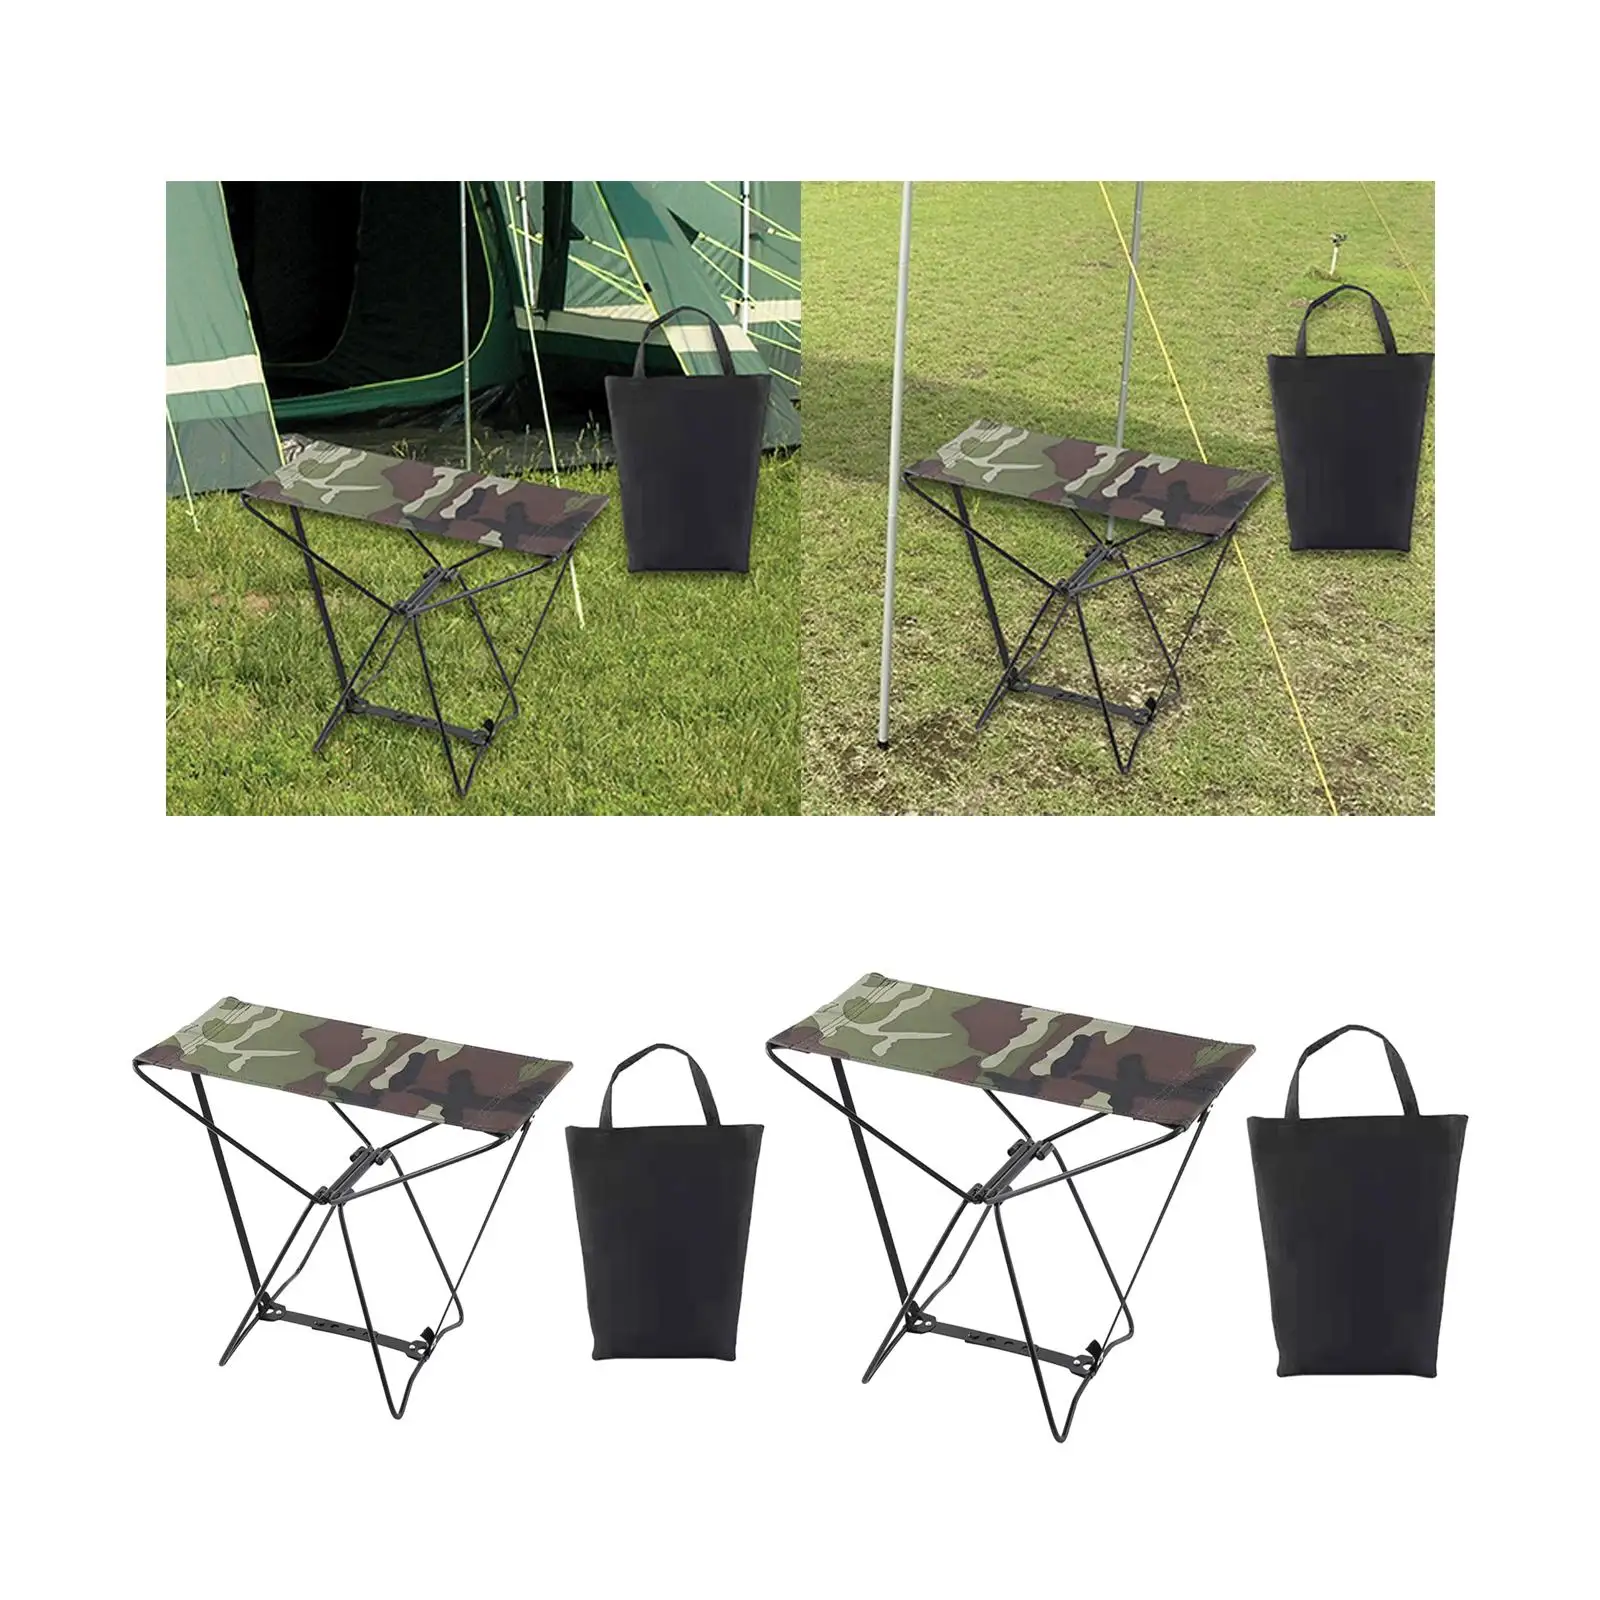 Folding Camping Stool Lightweight Folding Camp Stool Outdoor Foldable Stool Camping Chair for Patio Travel Fishing BBQ Beach